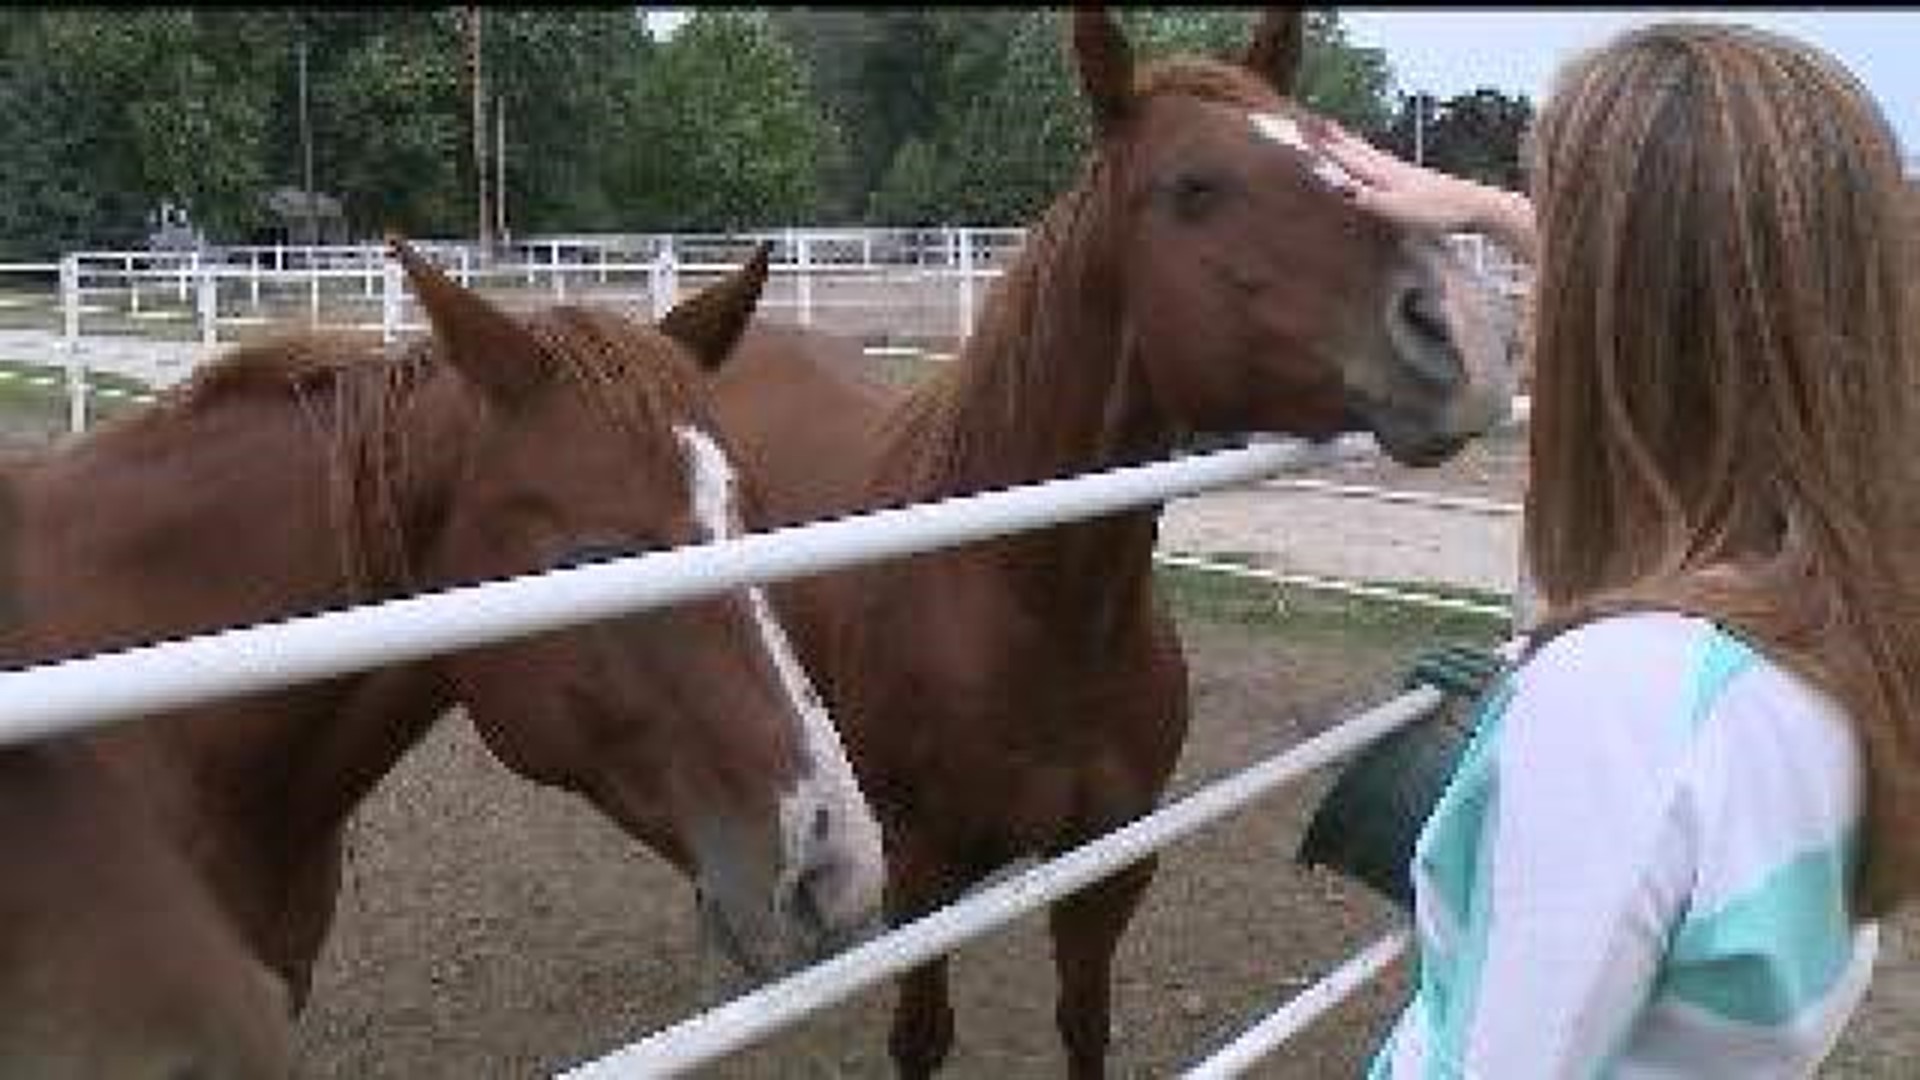 Starving horses rescued